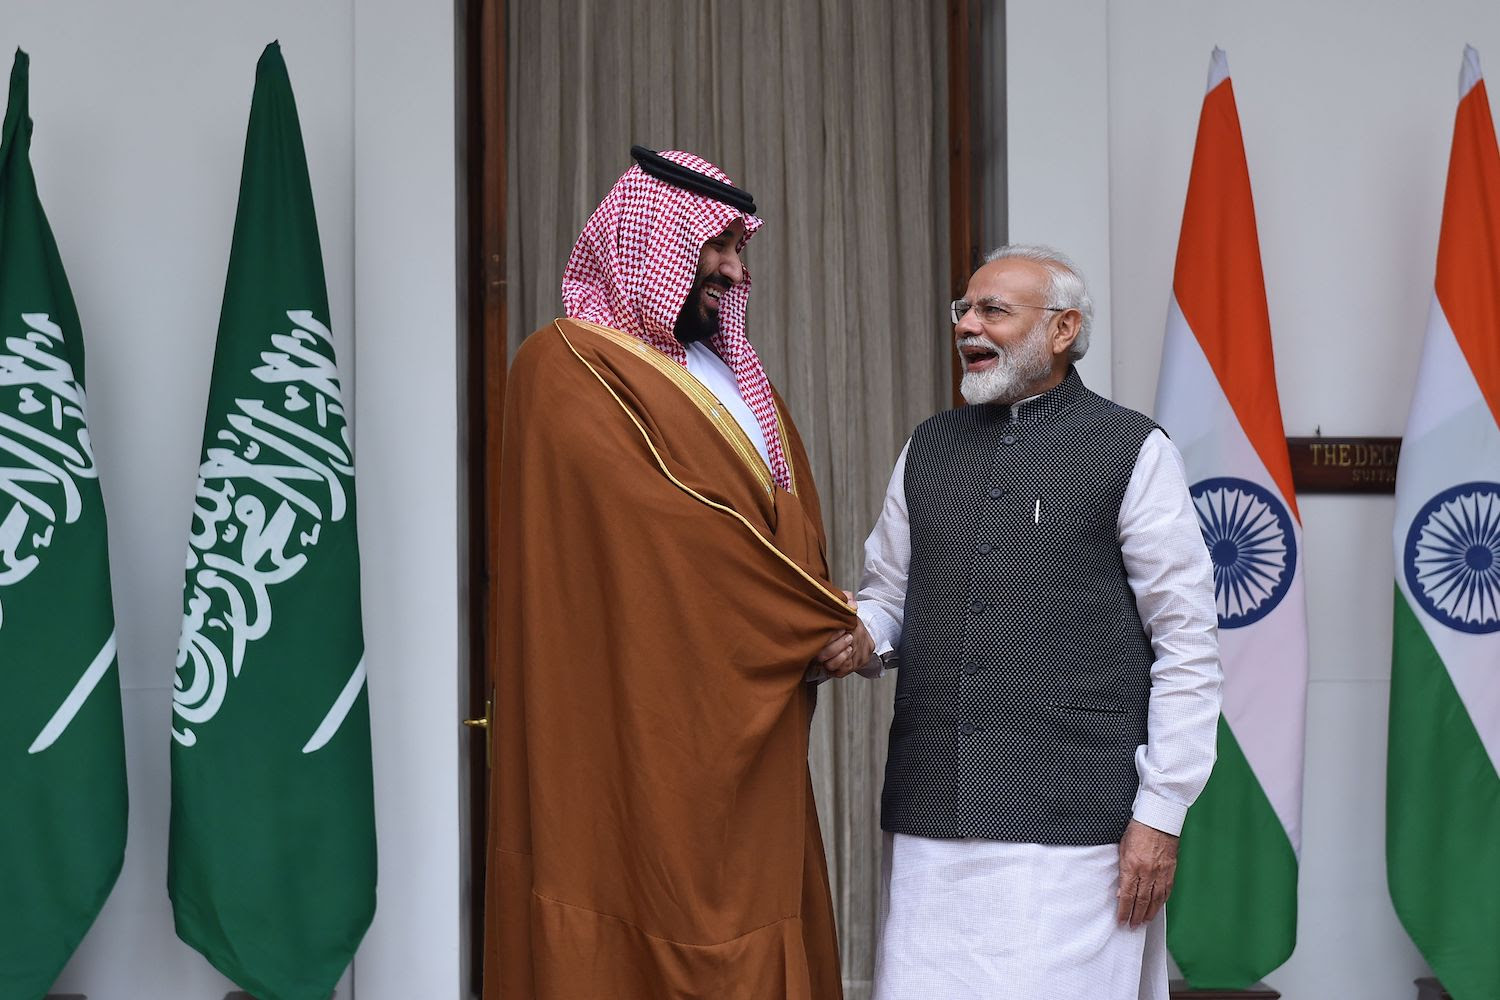 Indian Prime Minister Narendra Modi shakes hands with Saudi Crown Prince Mohammed bin Salman prior to a meeting in New Delhi on Feb. 20, 2019.